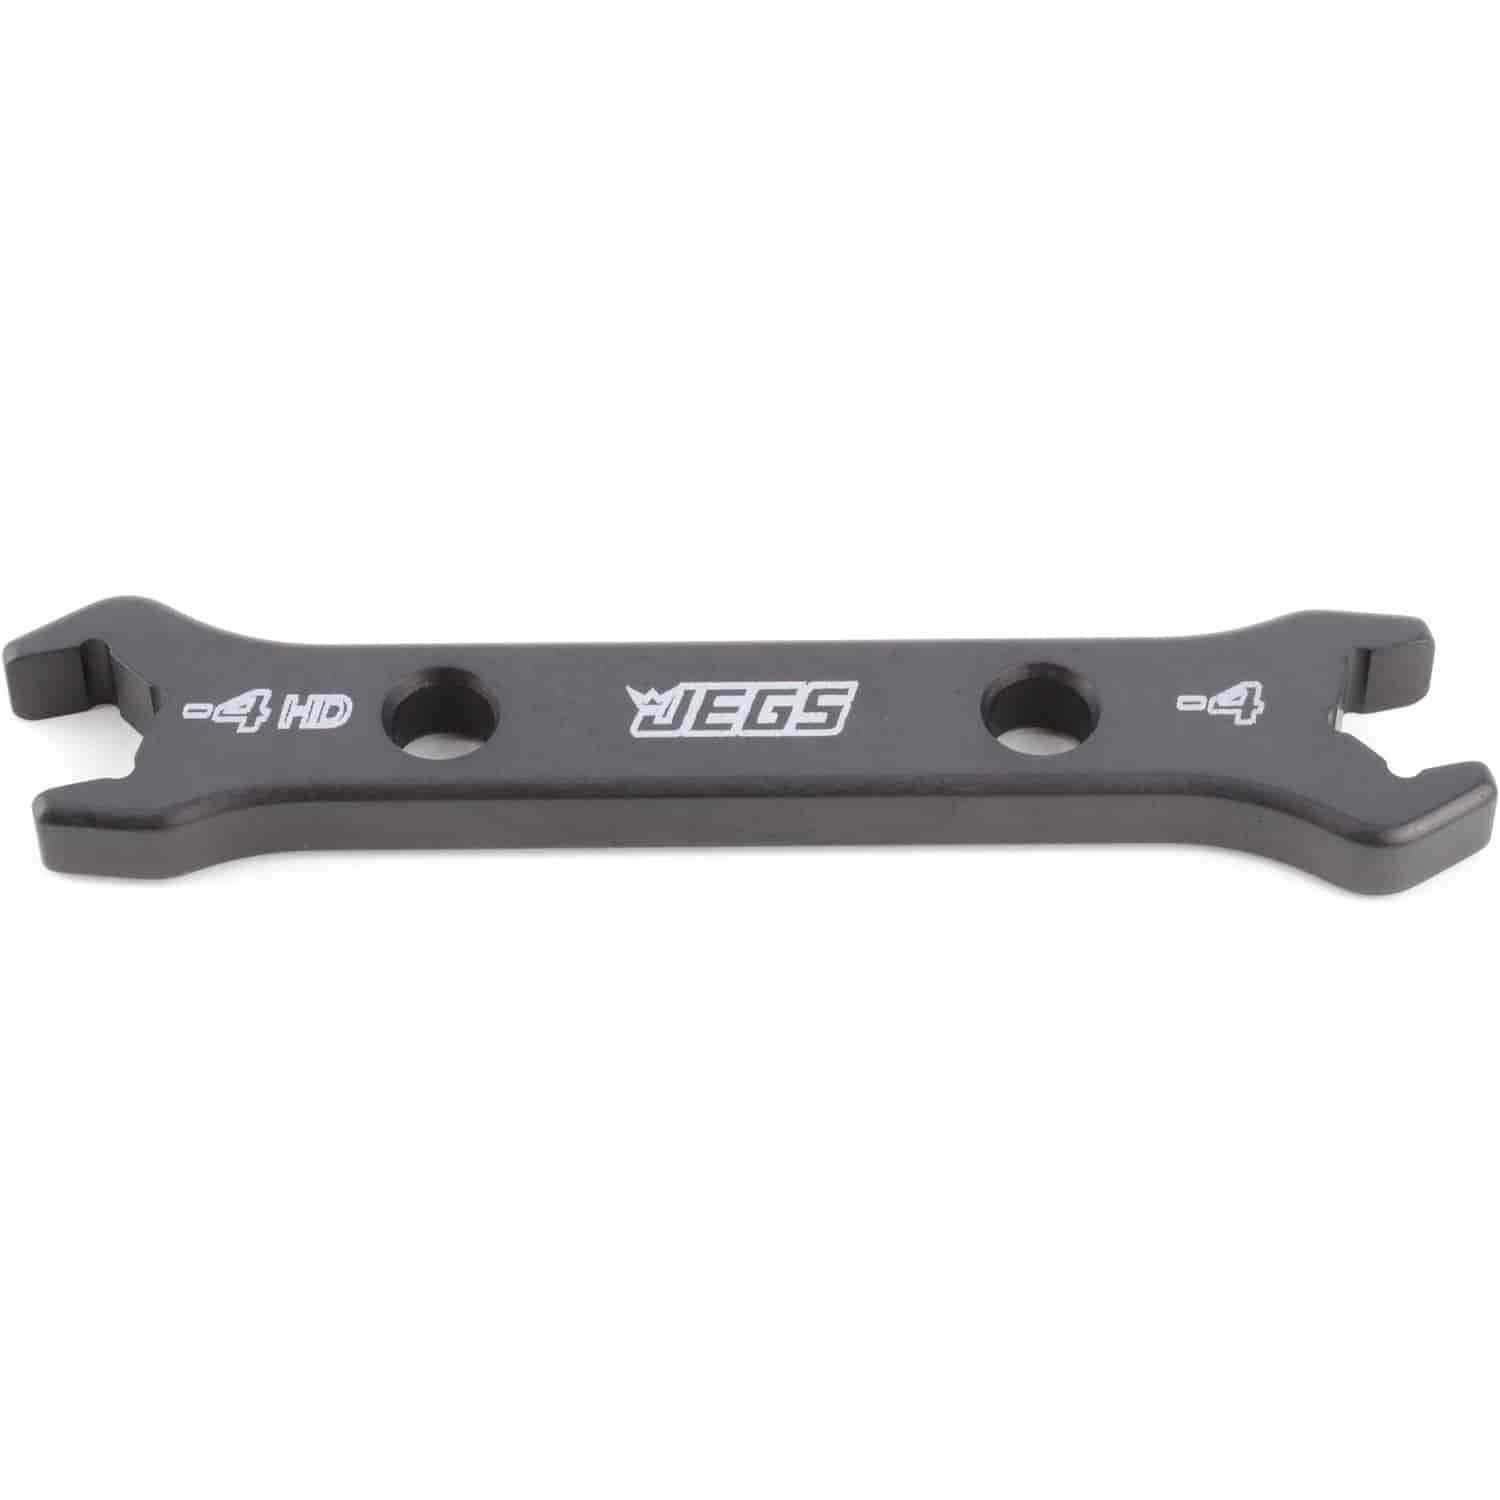 AN Open End Wrench Fits -4 AN (5/8 in. Hex) HD & -4 AN (9/16 in. Hex) Standard Fittings